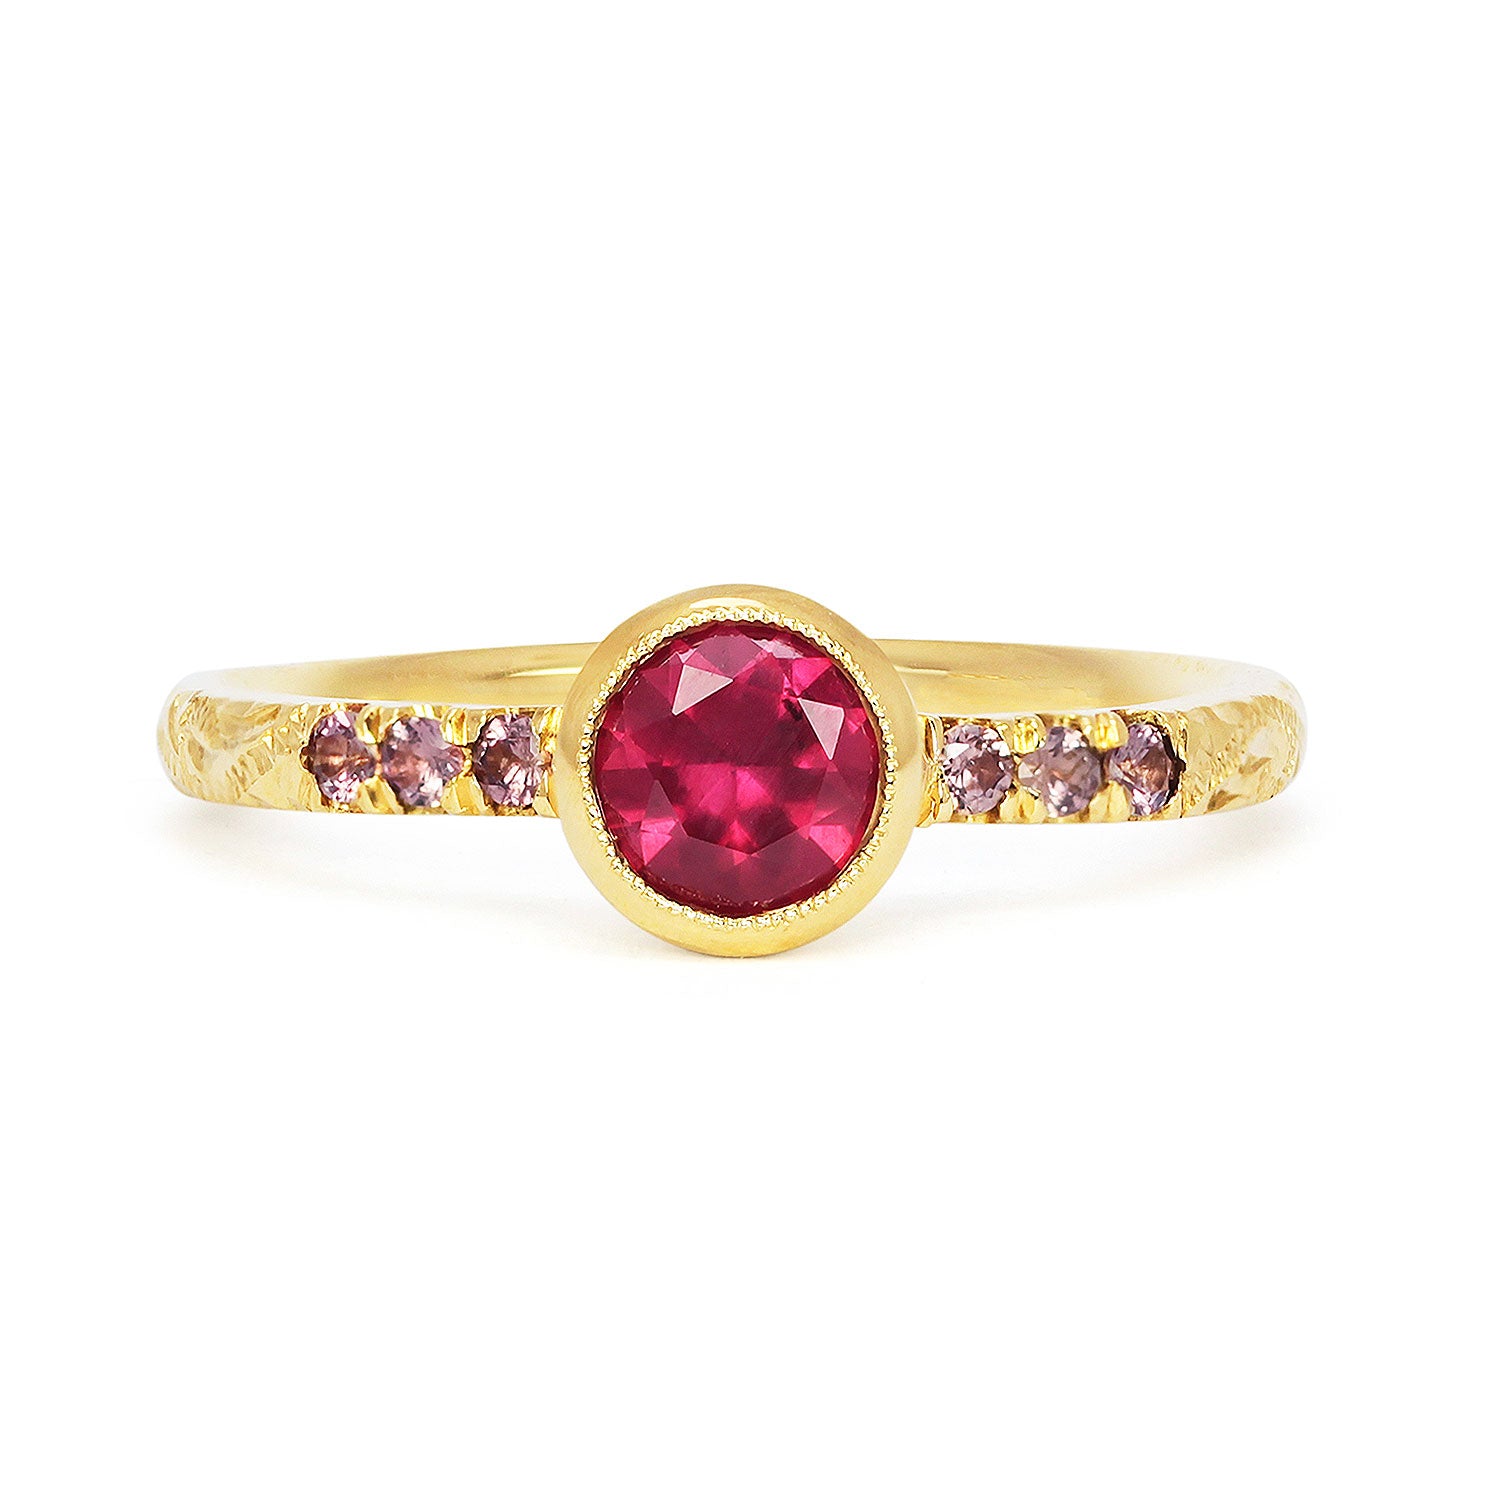 Bespoke Laurence customised Hebe engagement ring in 18ct recycled yellow gold with hand-engraved scrolls, a fair-trade Malawi ruby and ethical cognac sapphires